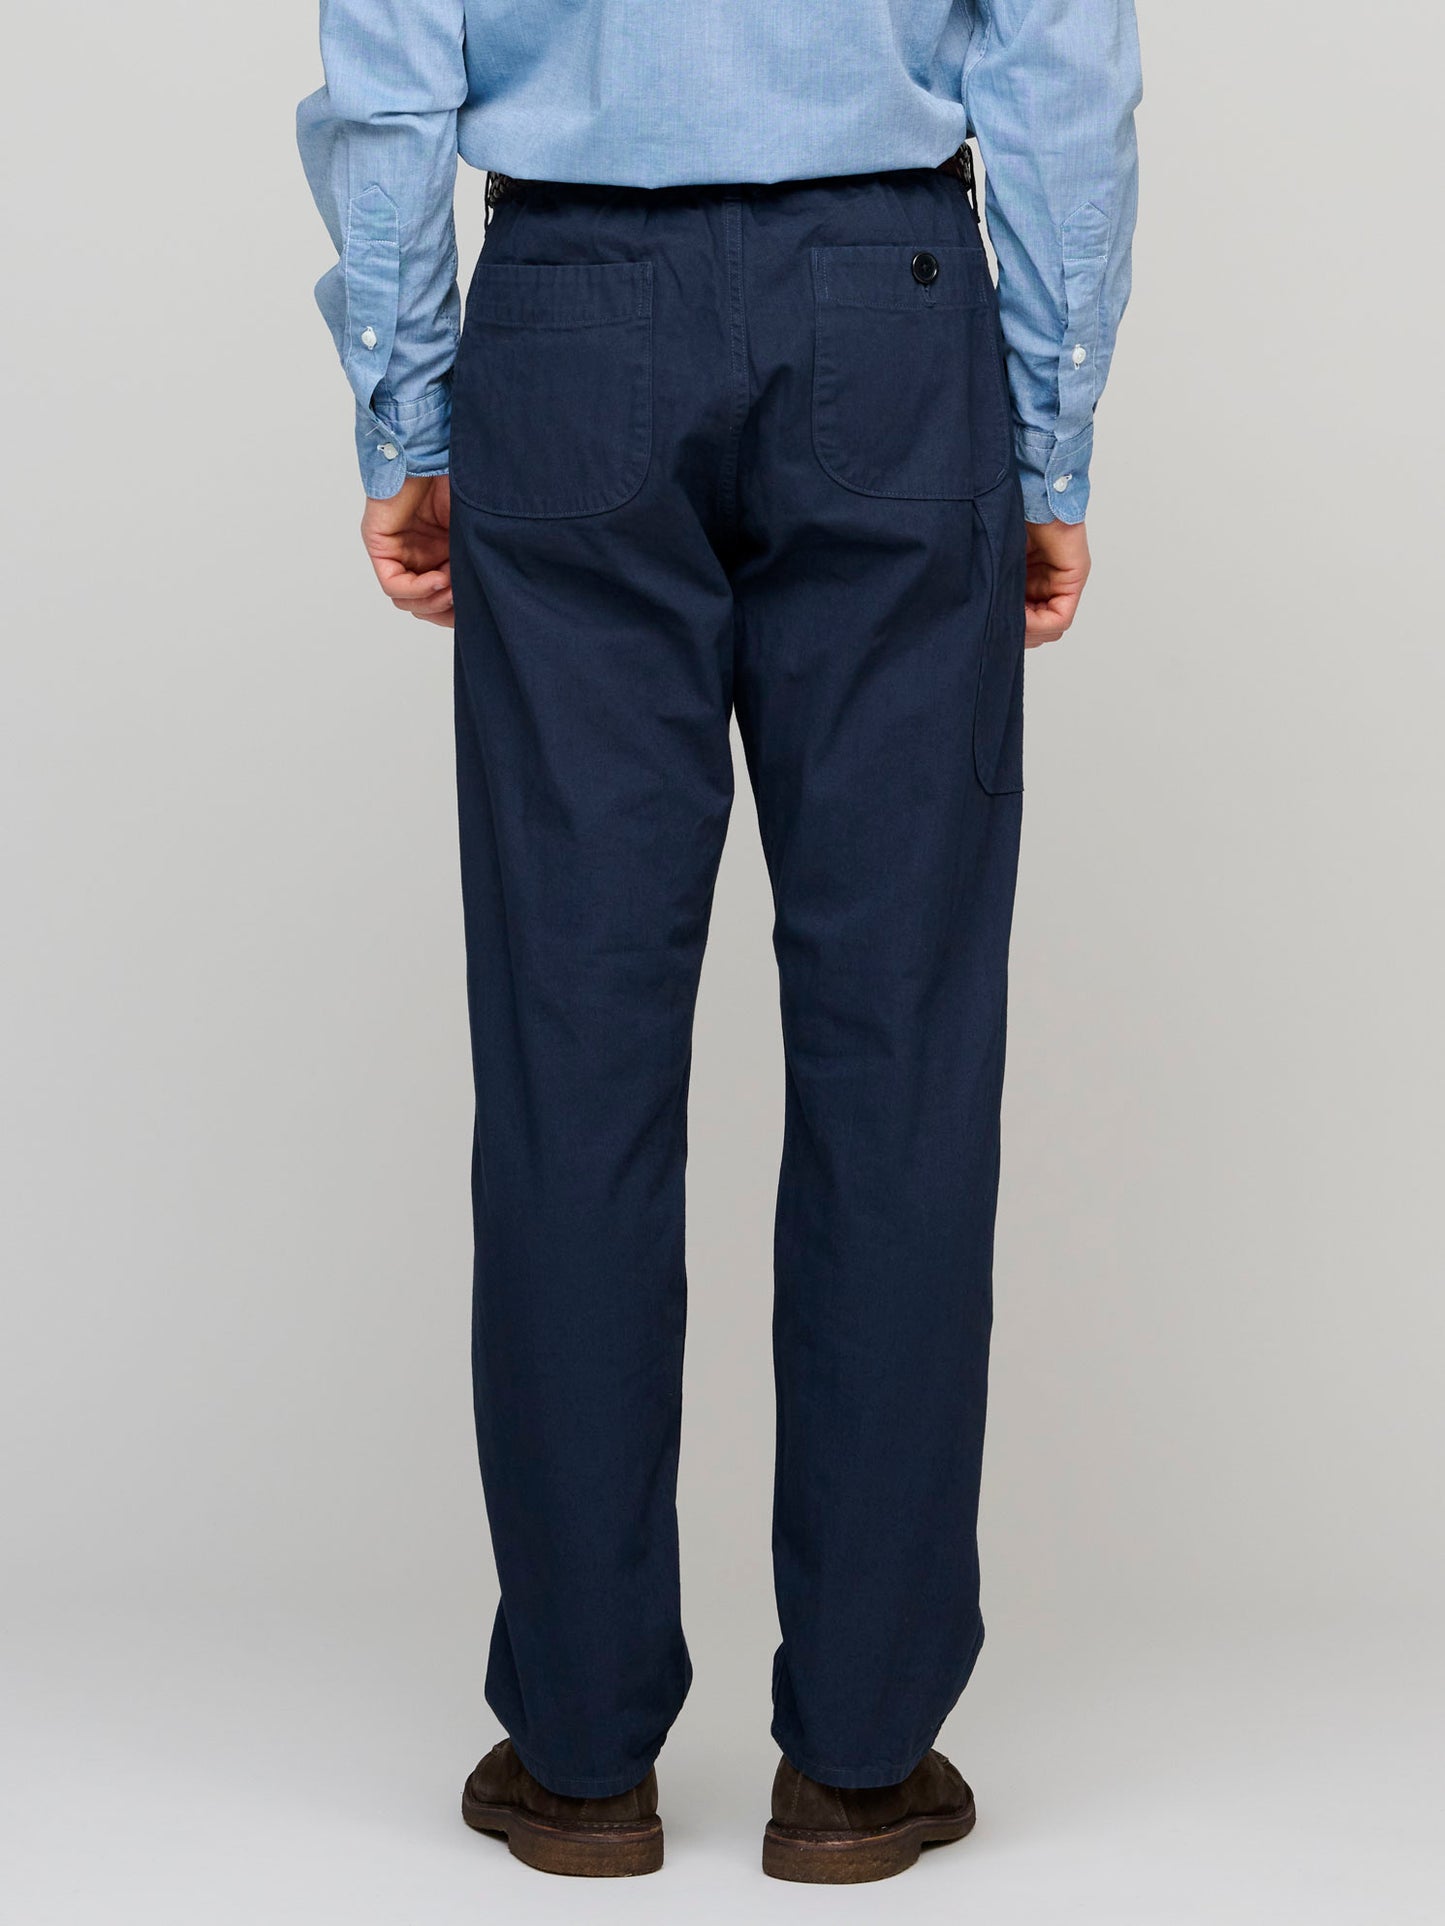 French Work Pants, Navy – Goods